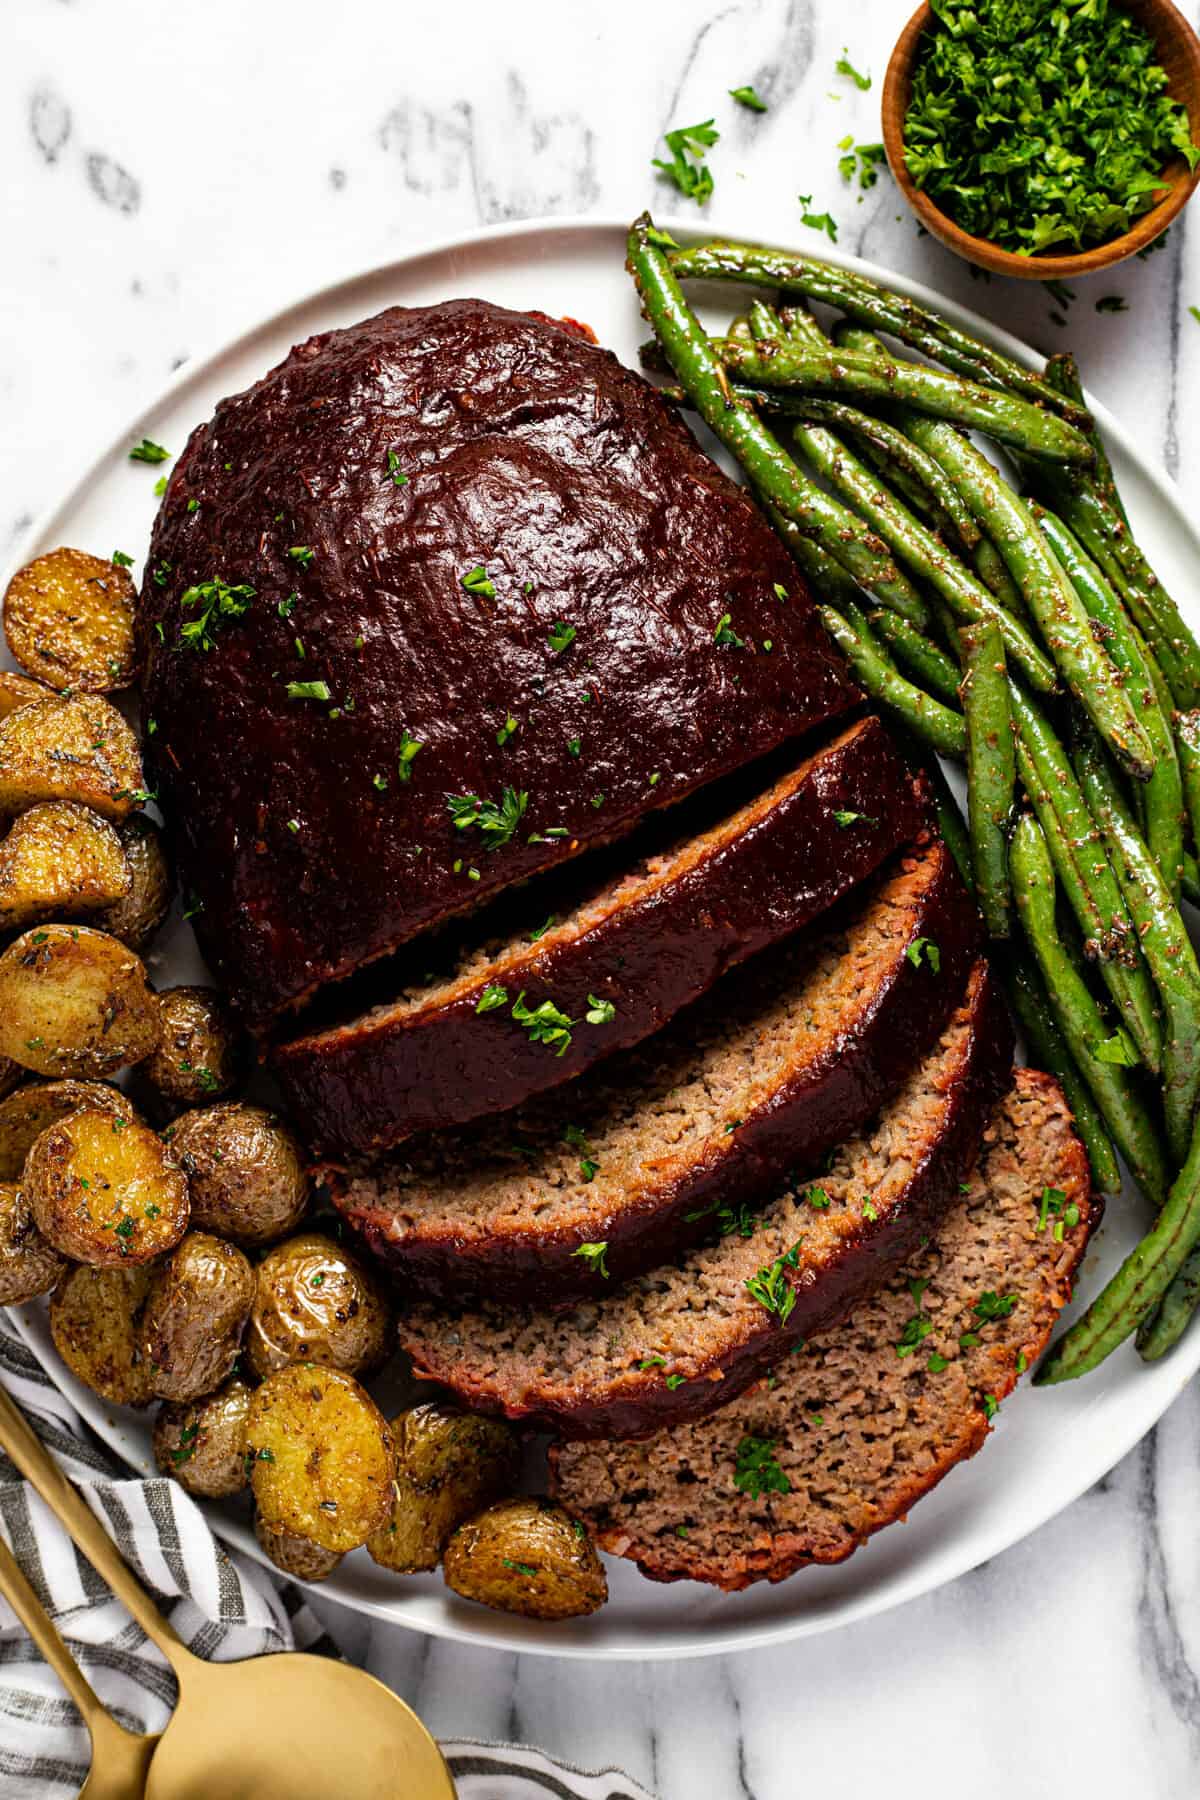 Sliced meatloaf on a white plate with roasted potatoes and green beans.